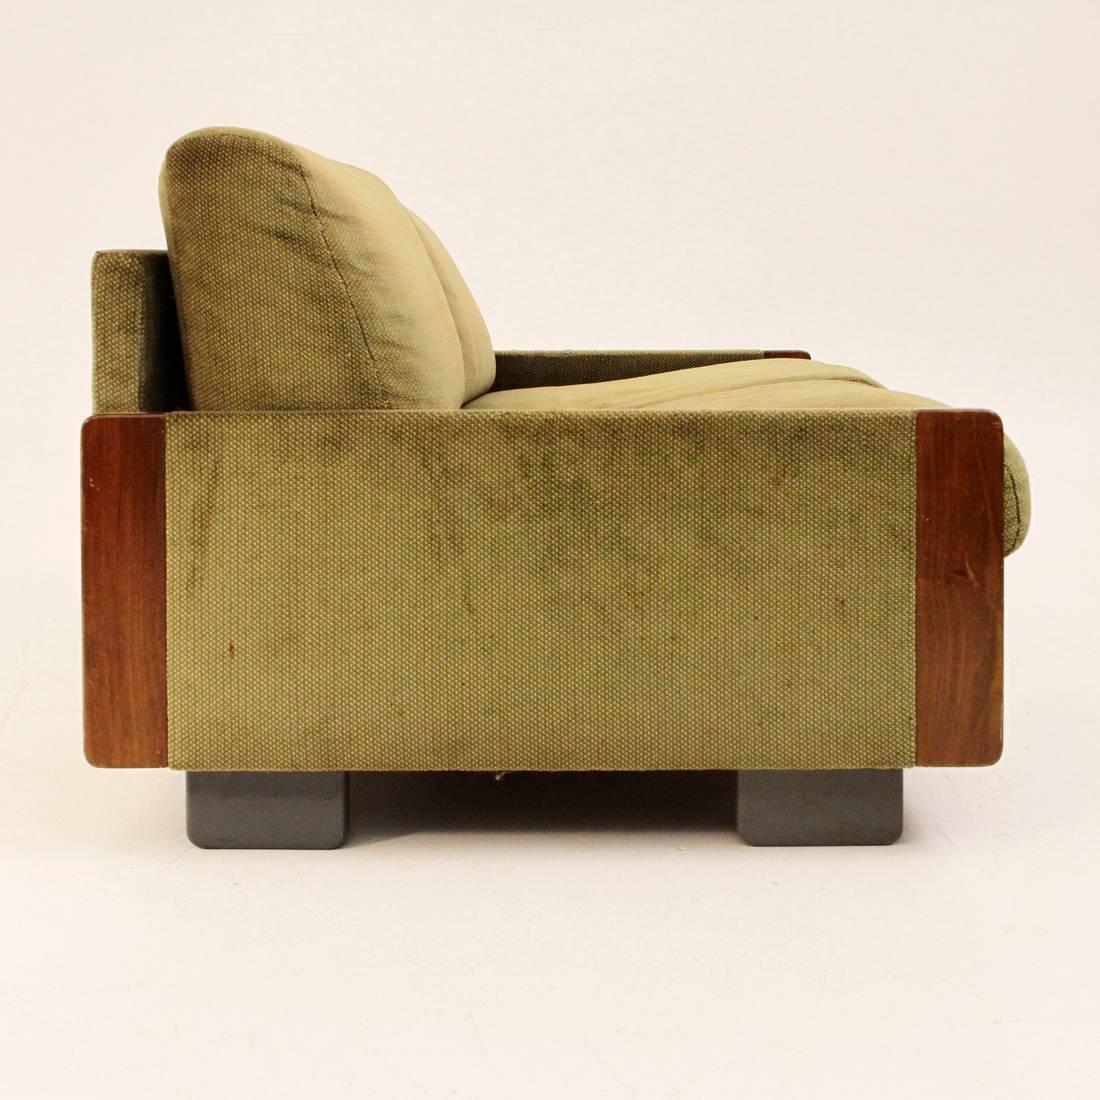 Mid-Century Modern Model 920 Sofa by Tobia Scarpa for Cassina, 1960s